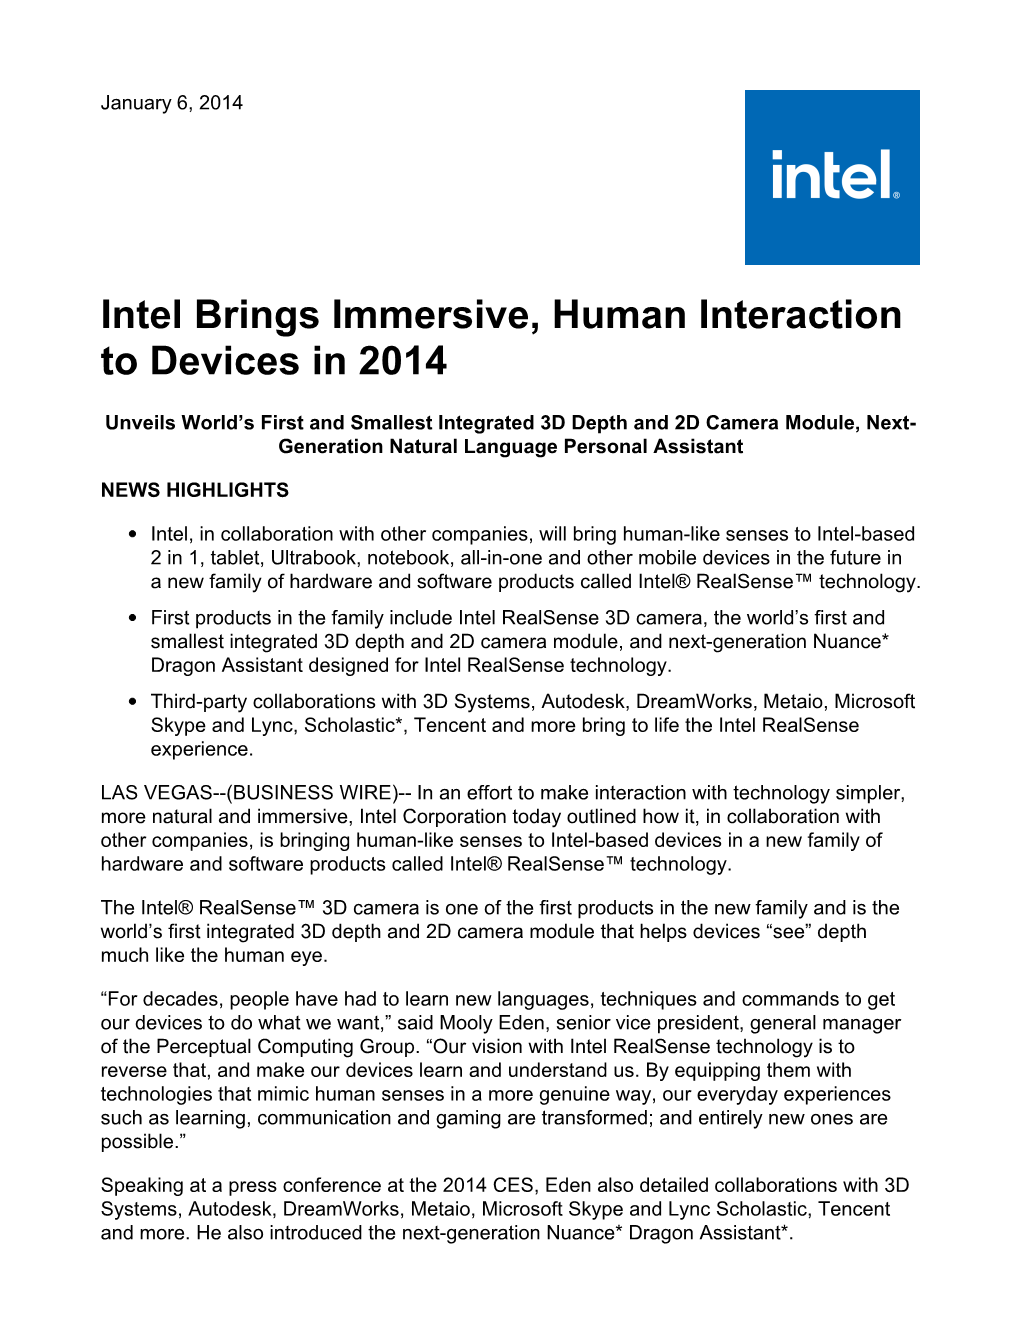 Intel Brings Immersive, Human Interaction to Devices in 2014